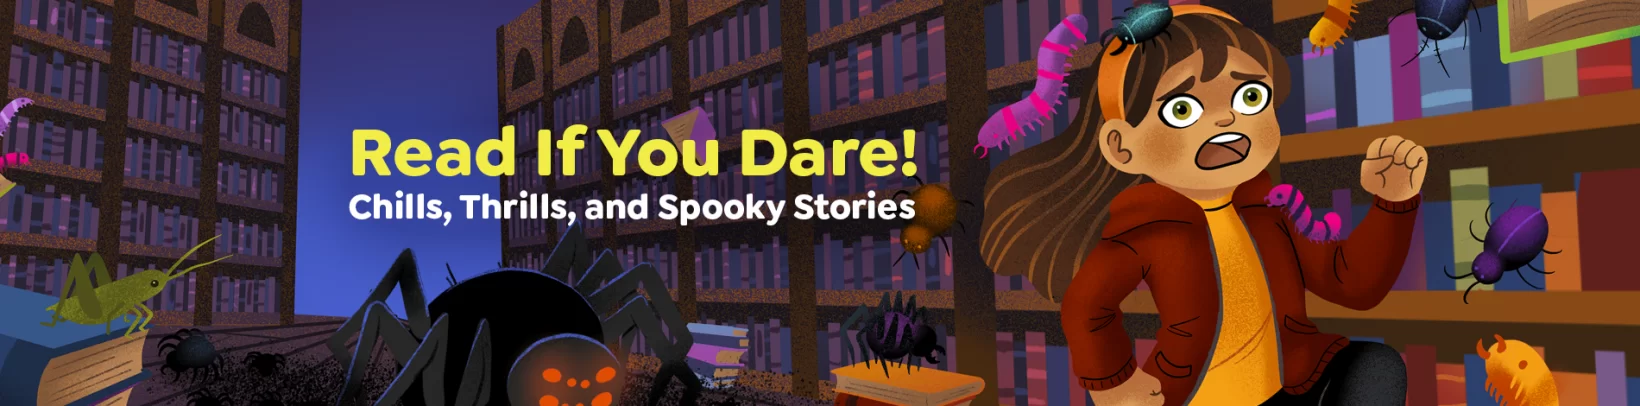 Illustrated image of little girl in library running away from evil, giant spider with text "Read If You Dare! Chills, Thrills, and Spooky Stories"